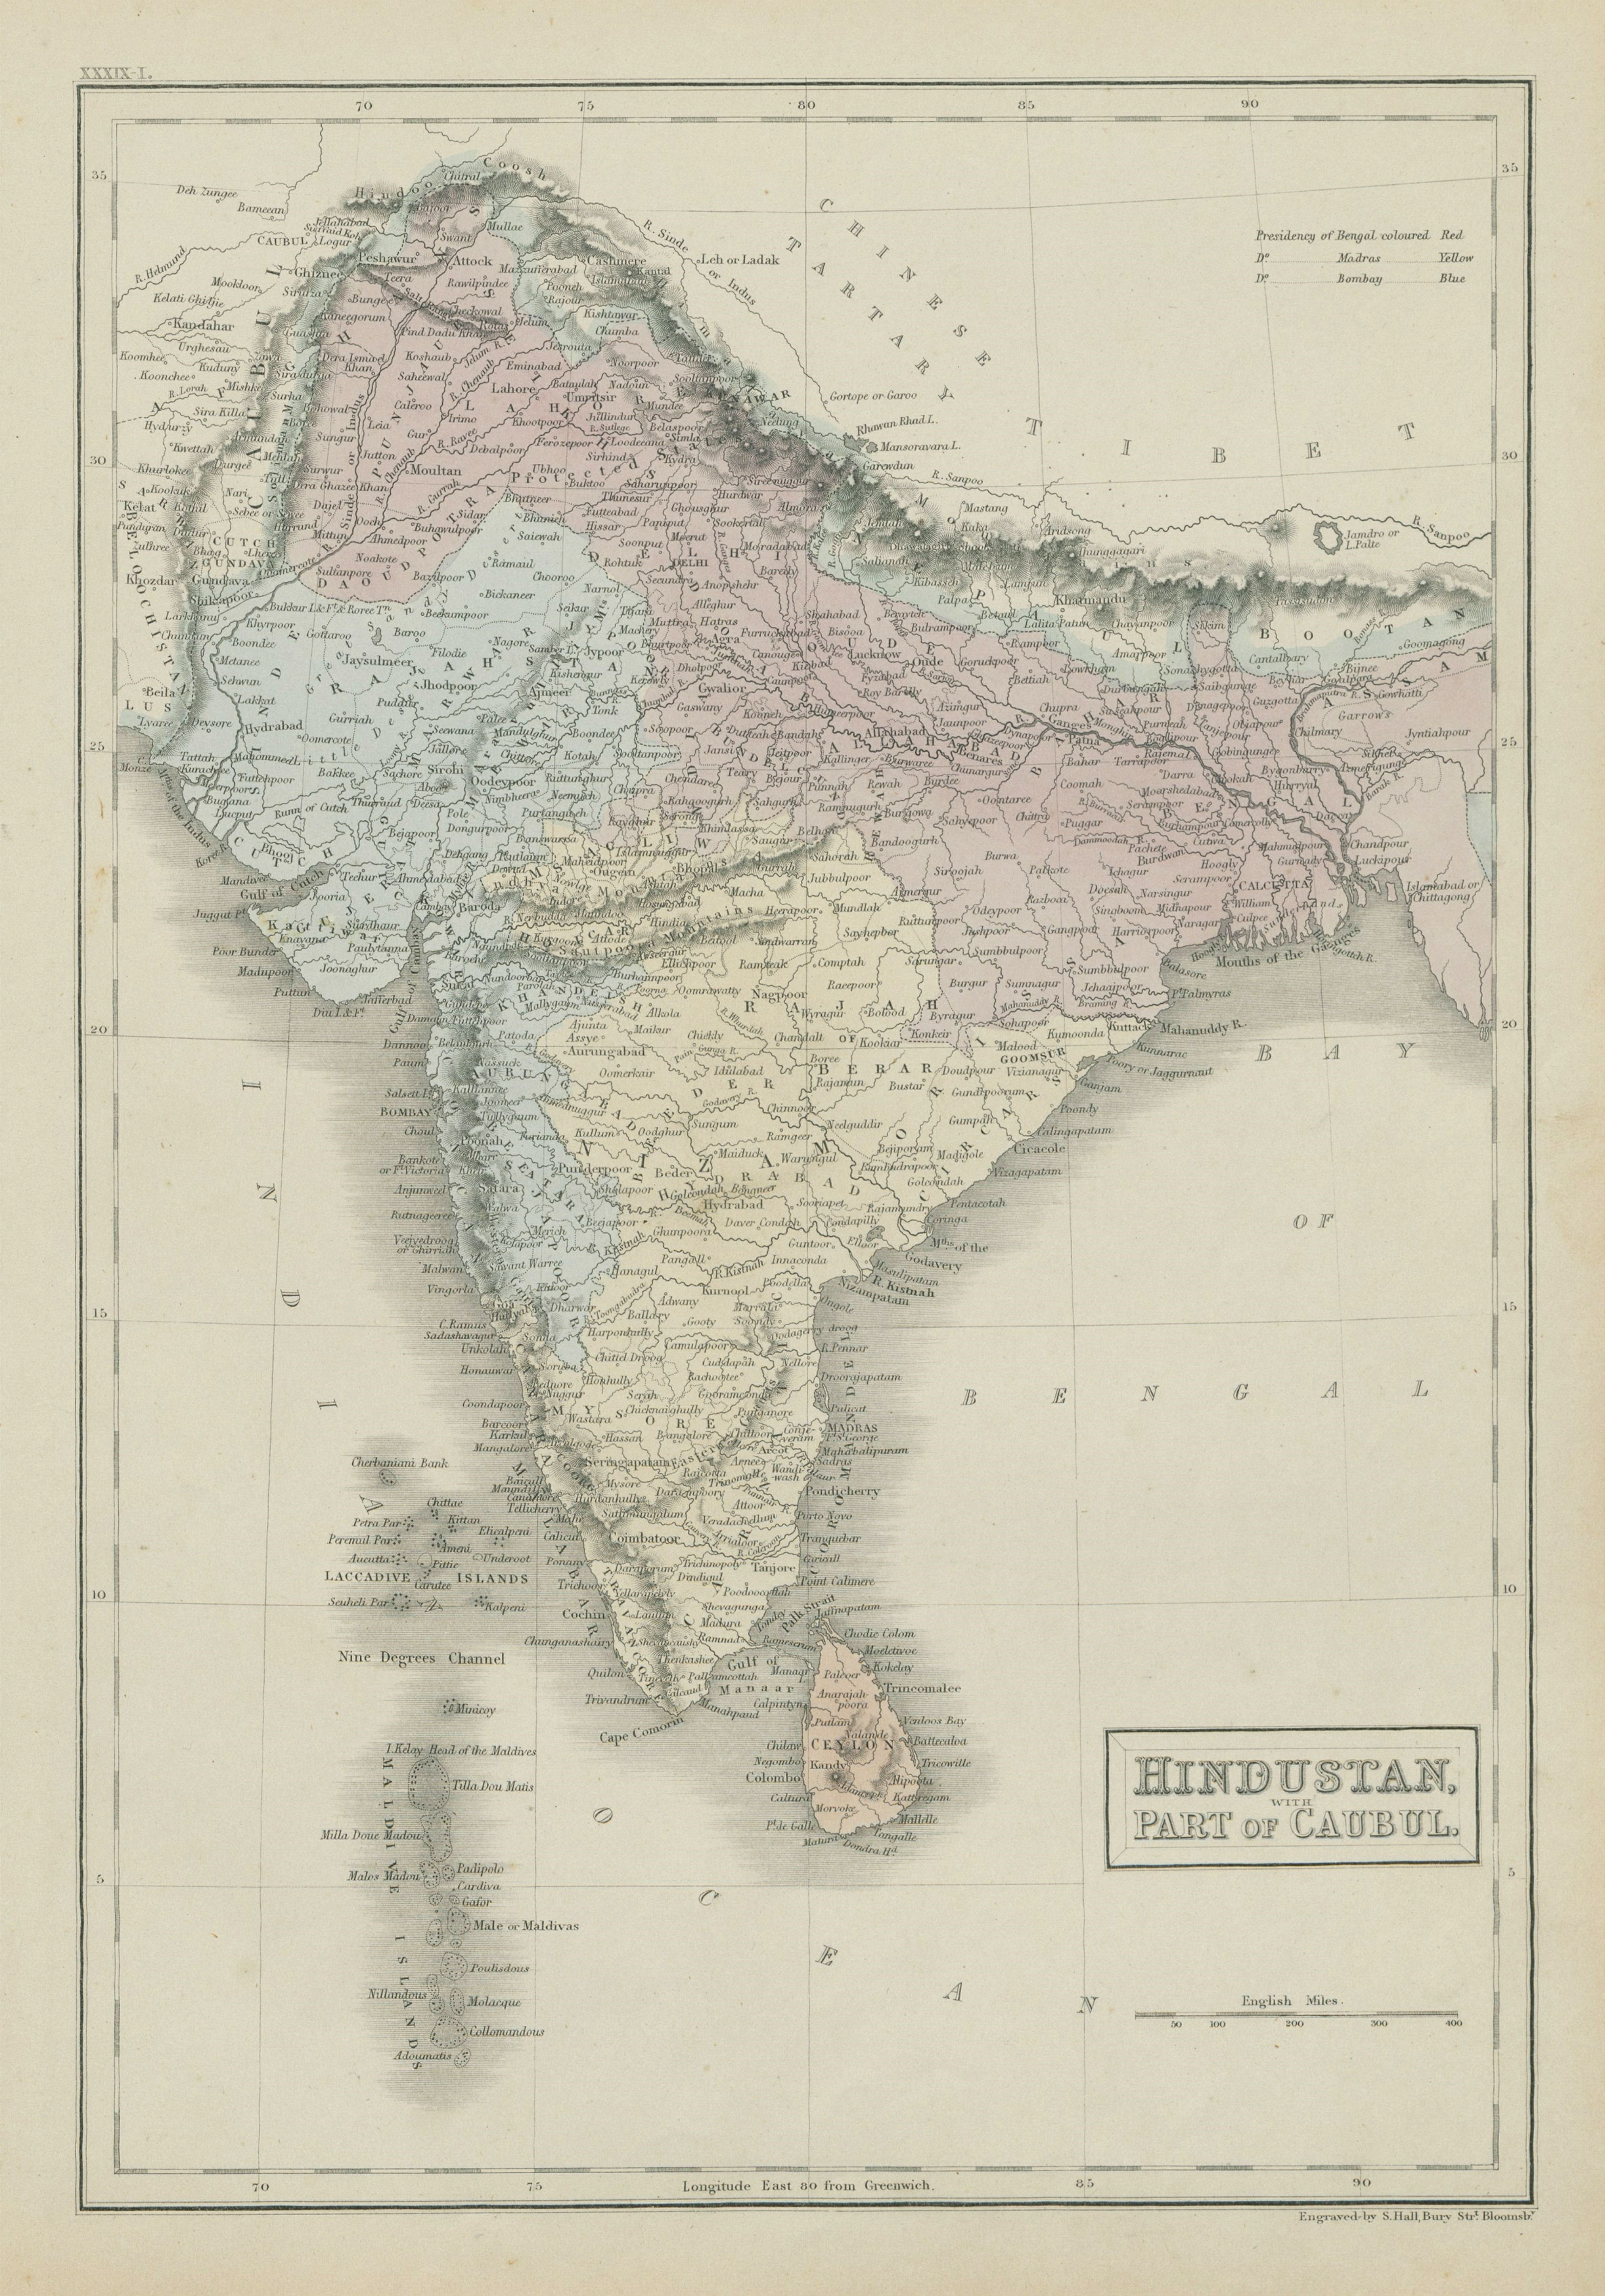 Associate Product Hindustan with part of Caubul. British India & Afghanistan. SIDNEY HALL 1856 map